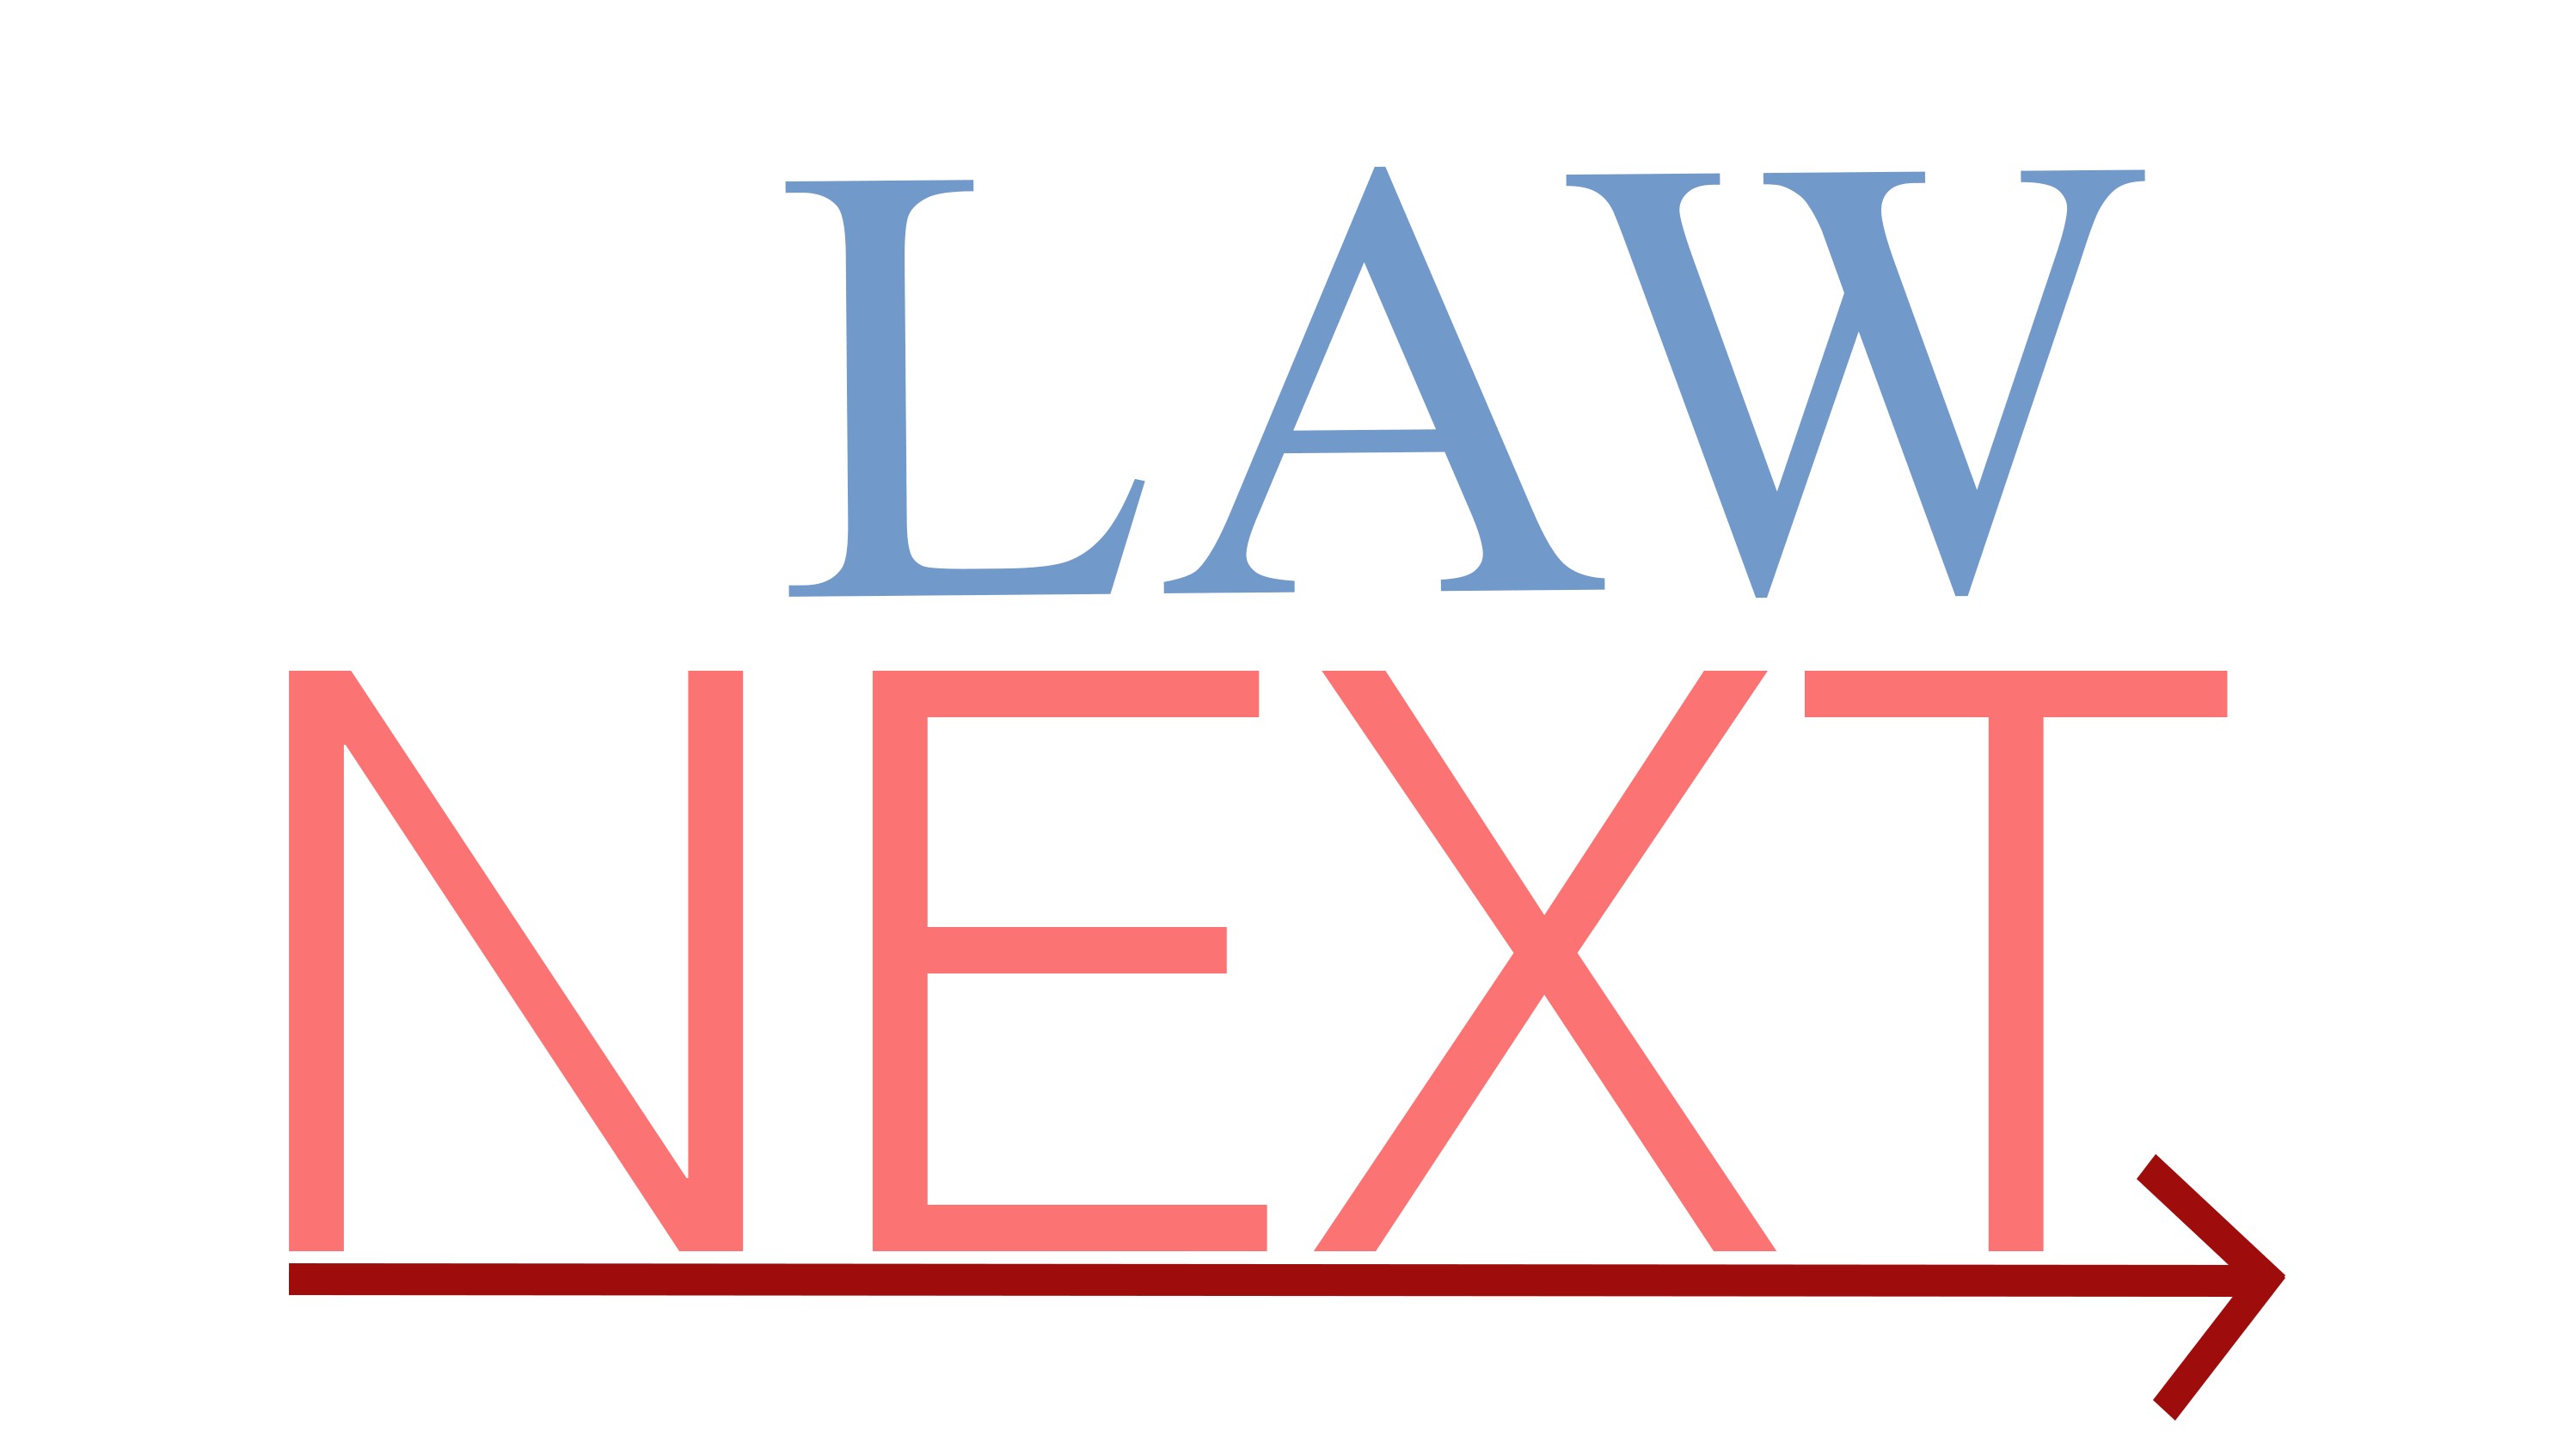 Introducing LawNext, My New Podcast about Innovation in Law, and My First Guest, Nicole Bradick